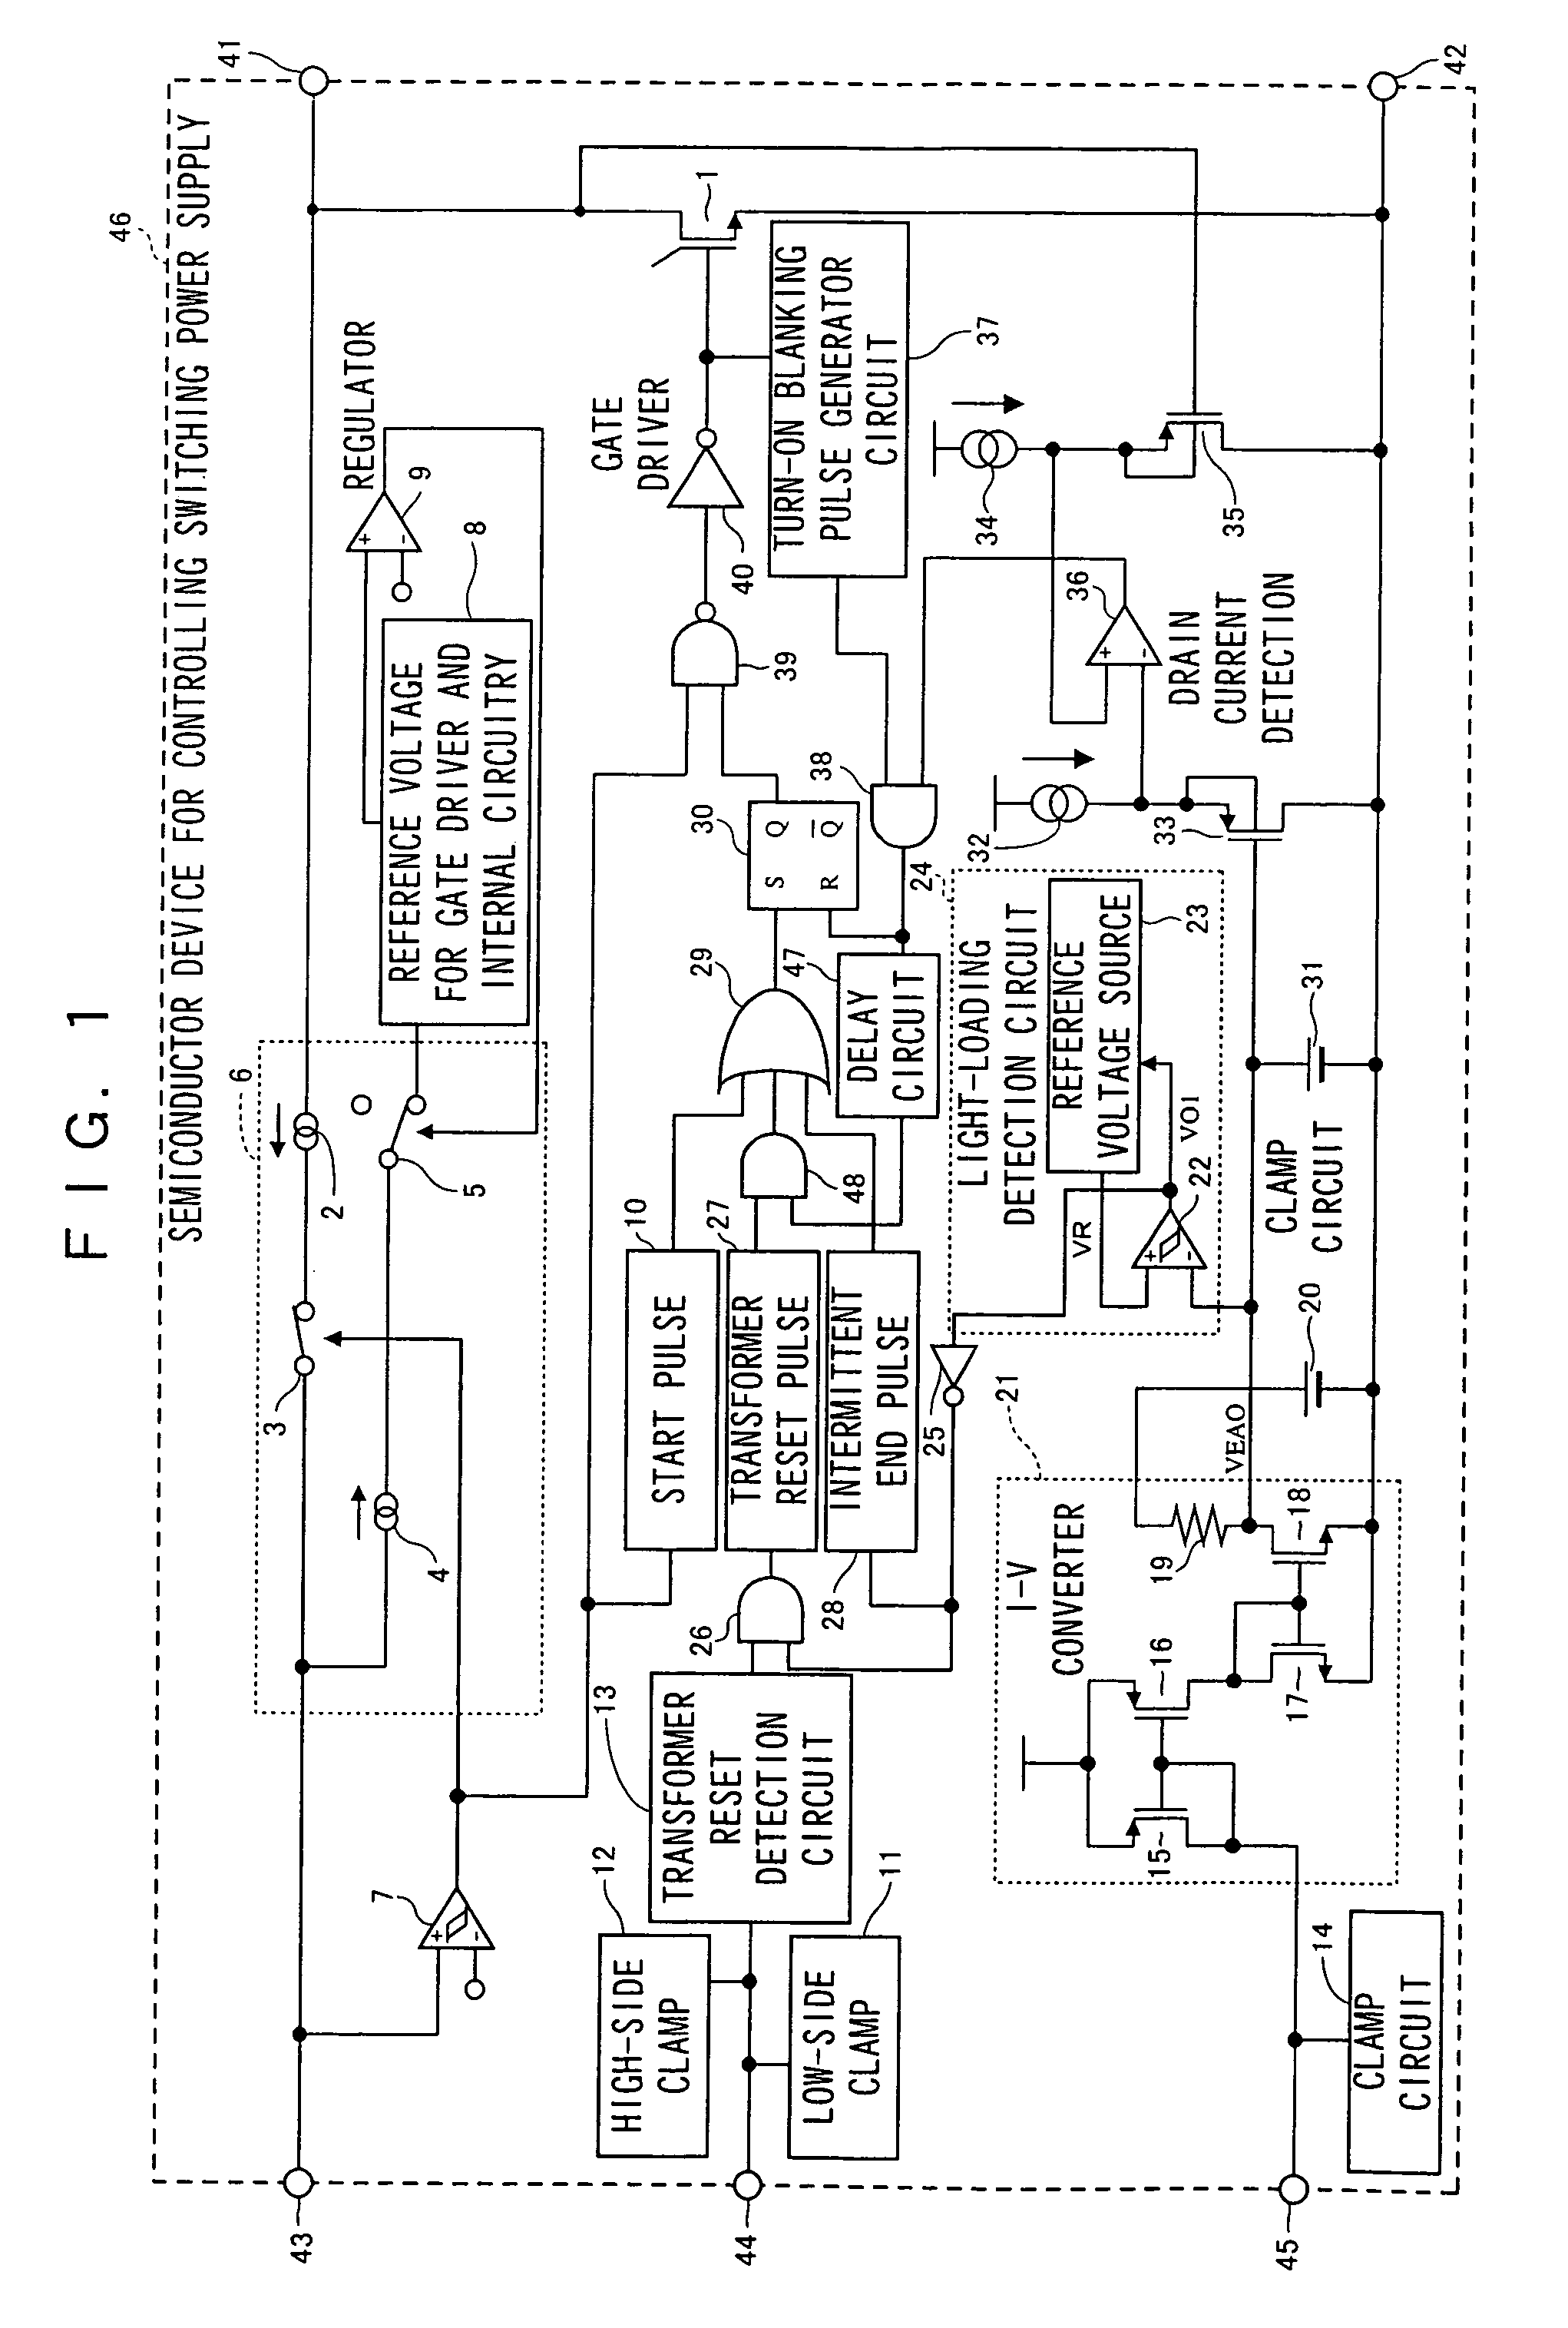 Semiconductor device for controlling switching power supply